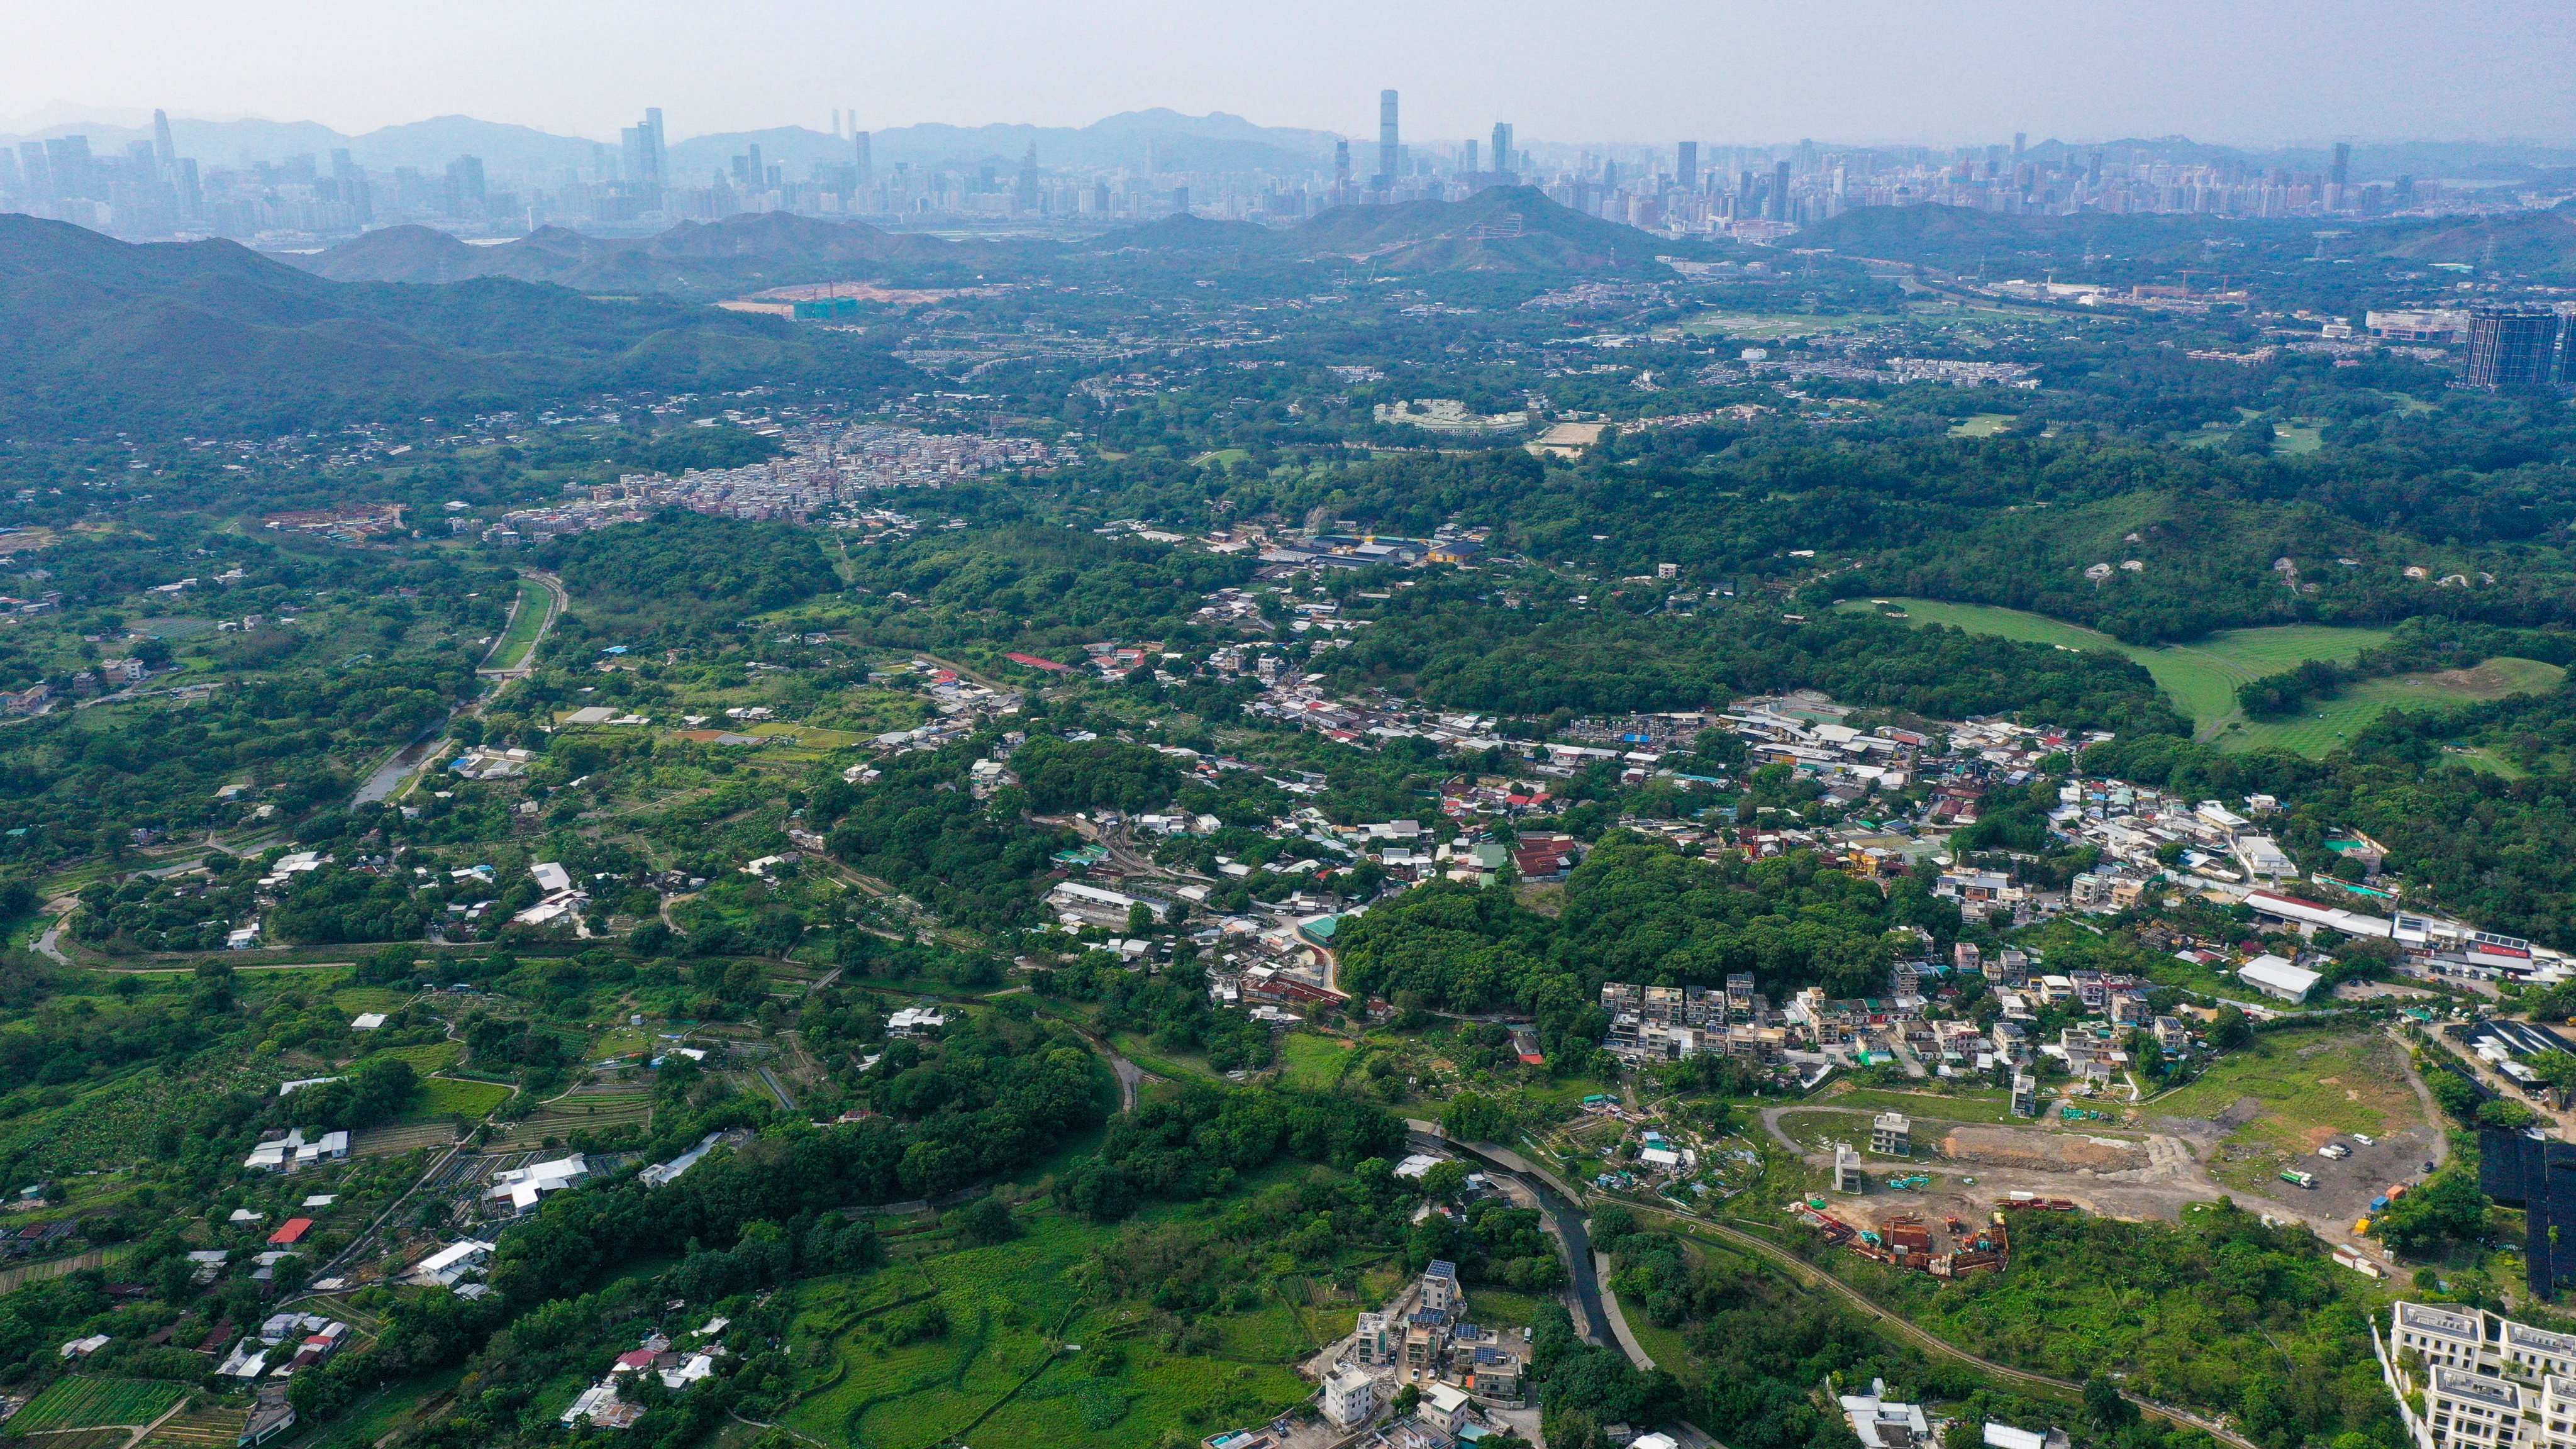 The mega development will cover 30,000 hectares in the New Territories. Photo: May Tse